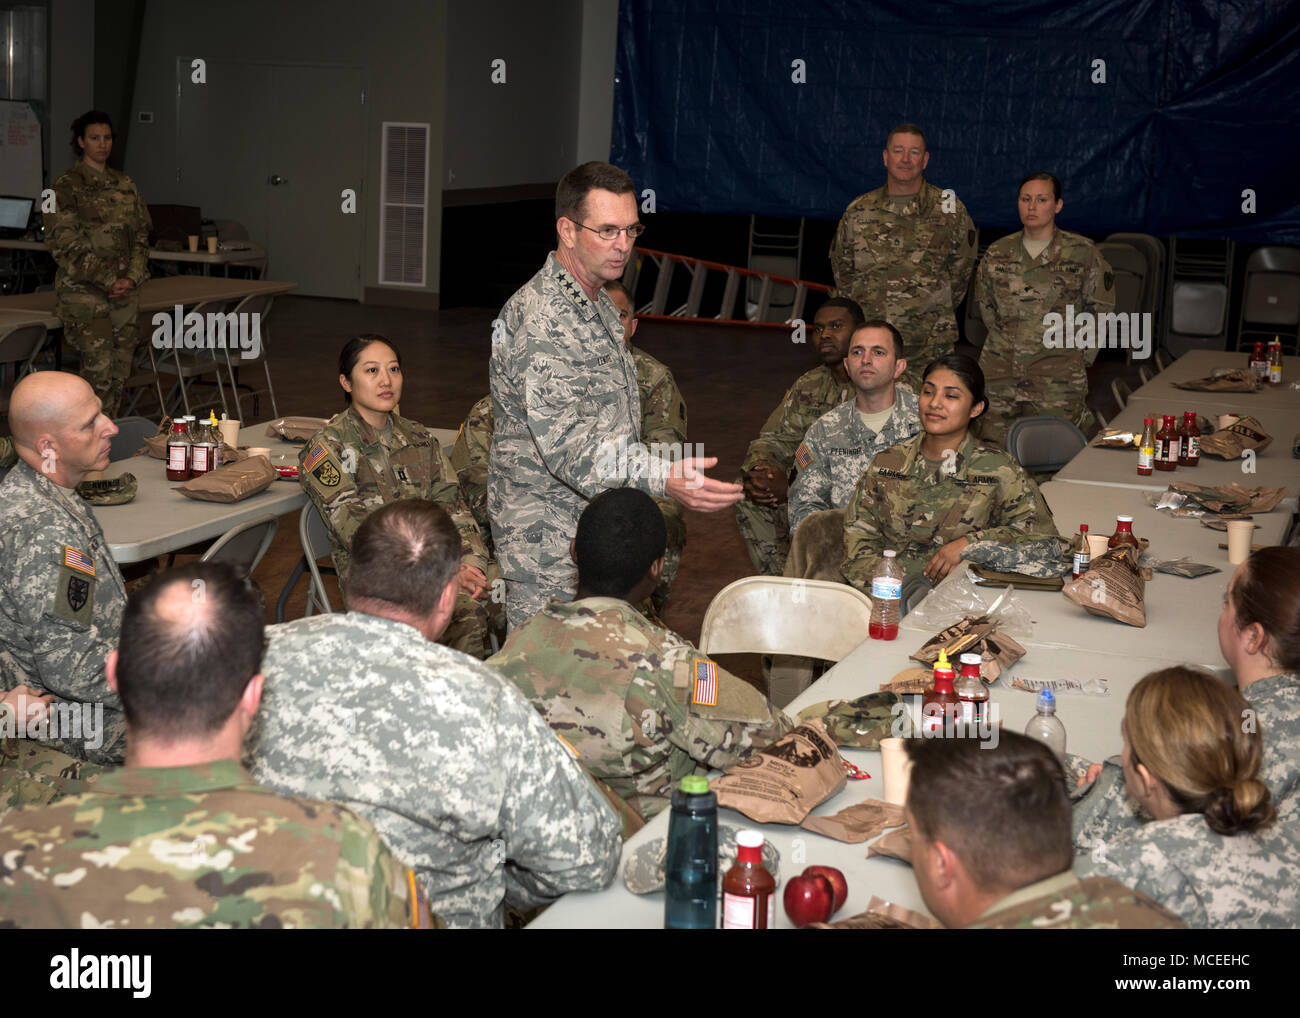 General Joseph L. Lengyel, Chief of the National Guard Bureau, has lunch with and speaks to Soldiers of the South Carolina Army National Guard who are participating in Guardian Response 18, April 14, 2018, North Vernon, Indiana. (U.S. Army National Guard photo by Sgt. Brian Calhoun, 108th Public Affairs Det.) Stock Photo